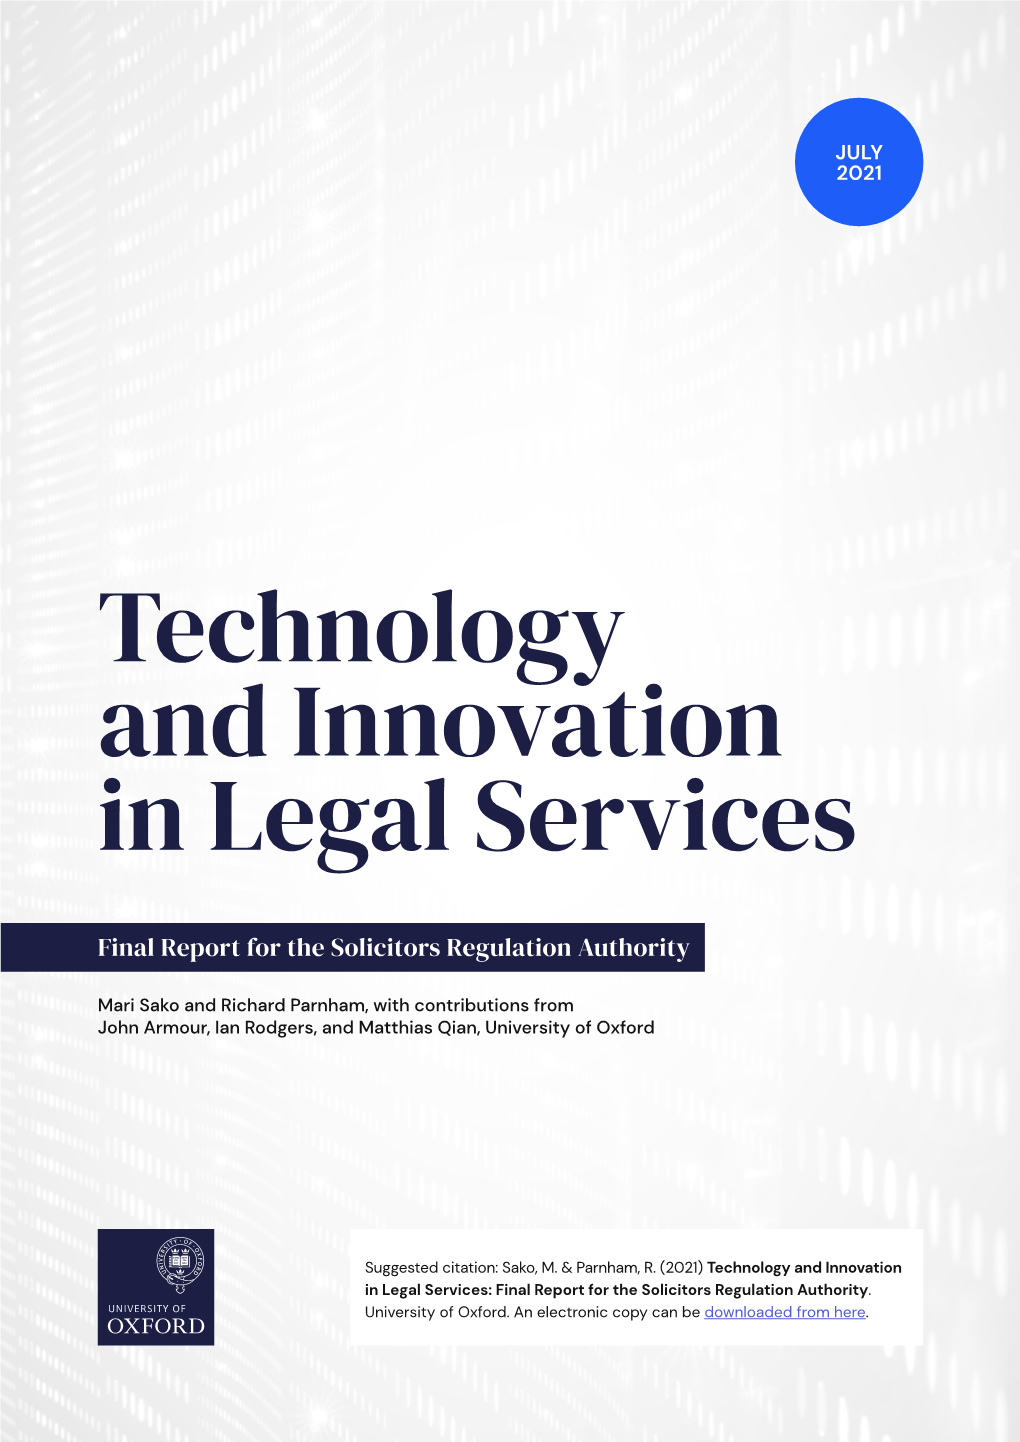 Technology and Innovation in Legal Services